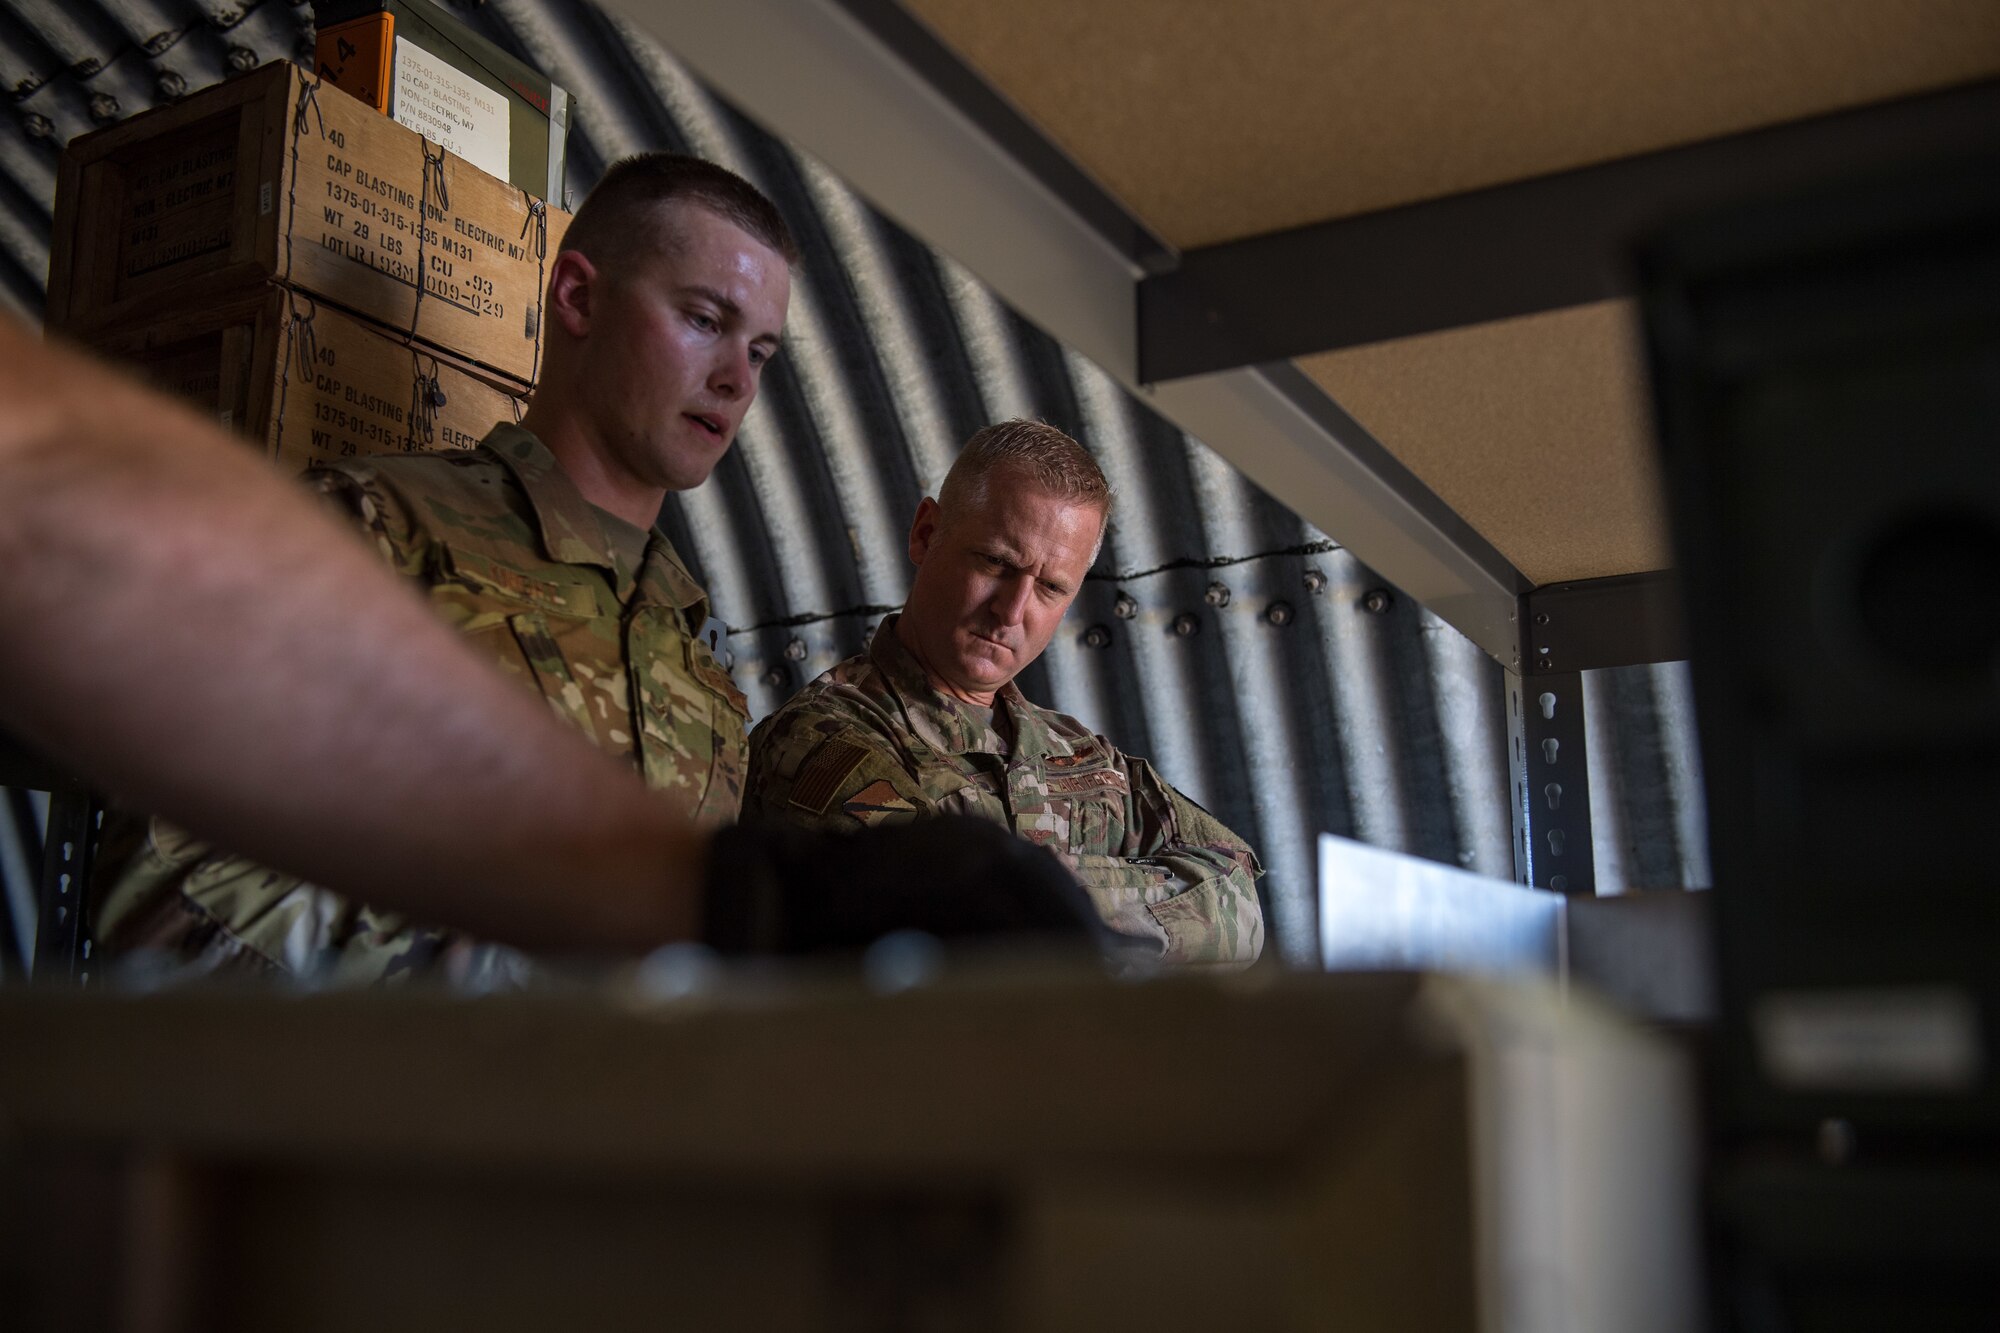 U.S. Air Force Airman 1st Class Thomas Knight, 325th Maintenance Squadron stockpile surveillance crew chief, shows Col. Brian Laidlaw, 325th Fighter Wing commander, how munitions are organized at Tyndall Air Force Base, Florida, July 17, 2019.